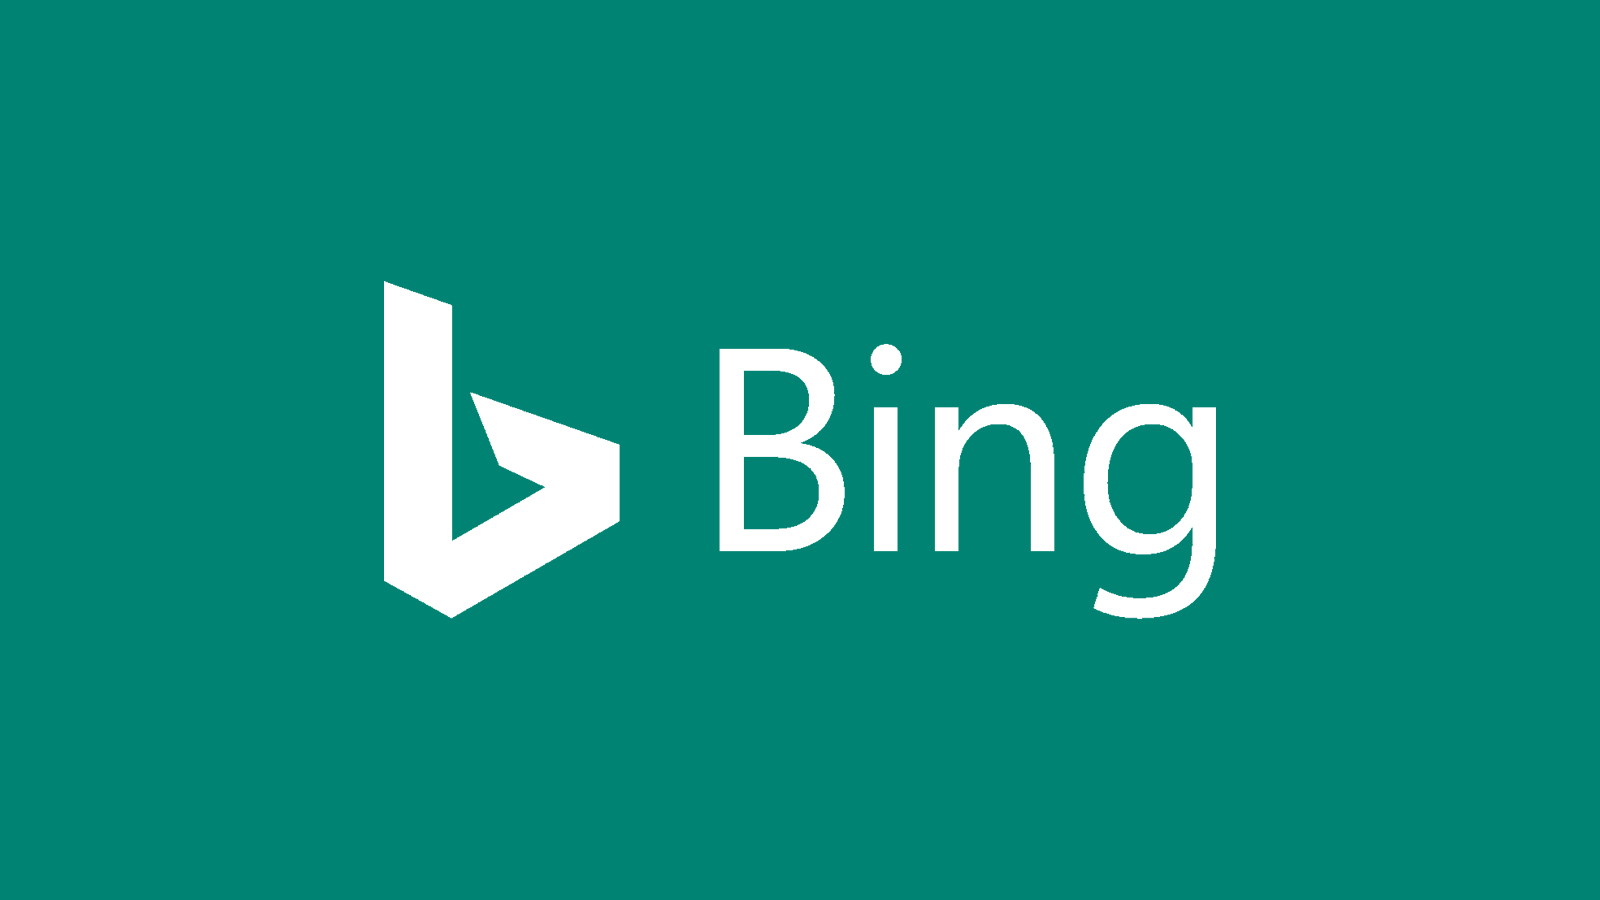 Microsoft Office 365 ProPlus to Forcibly Change to Bing - TechNadu